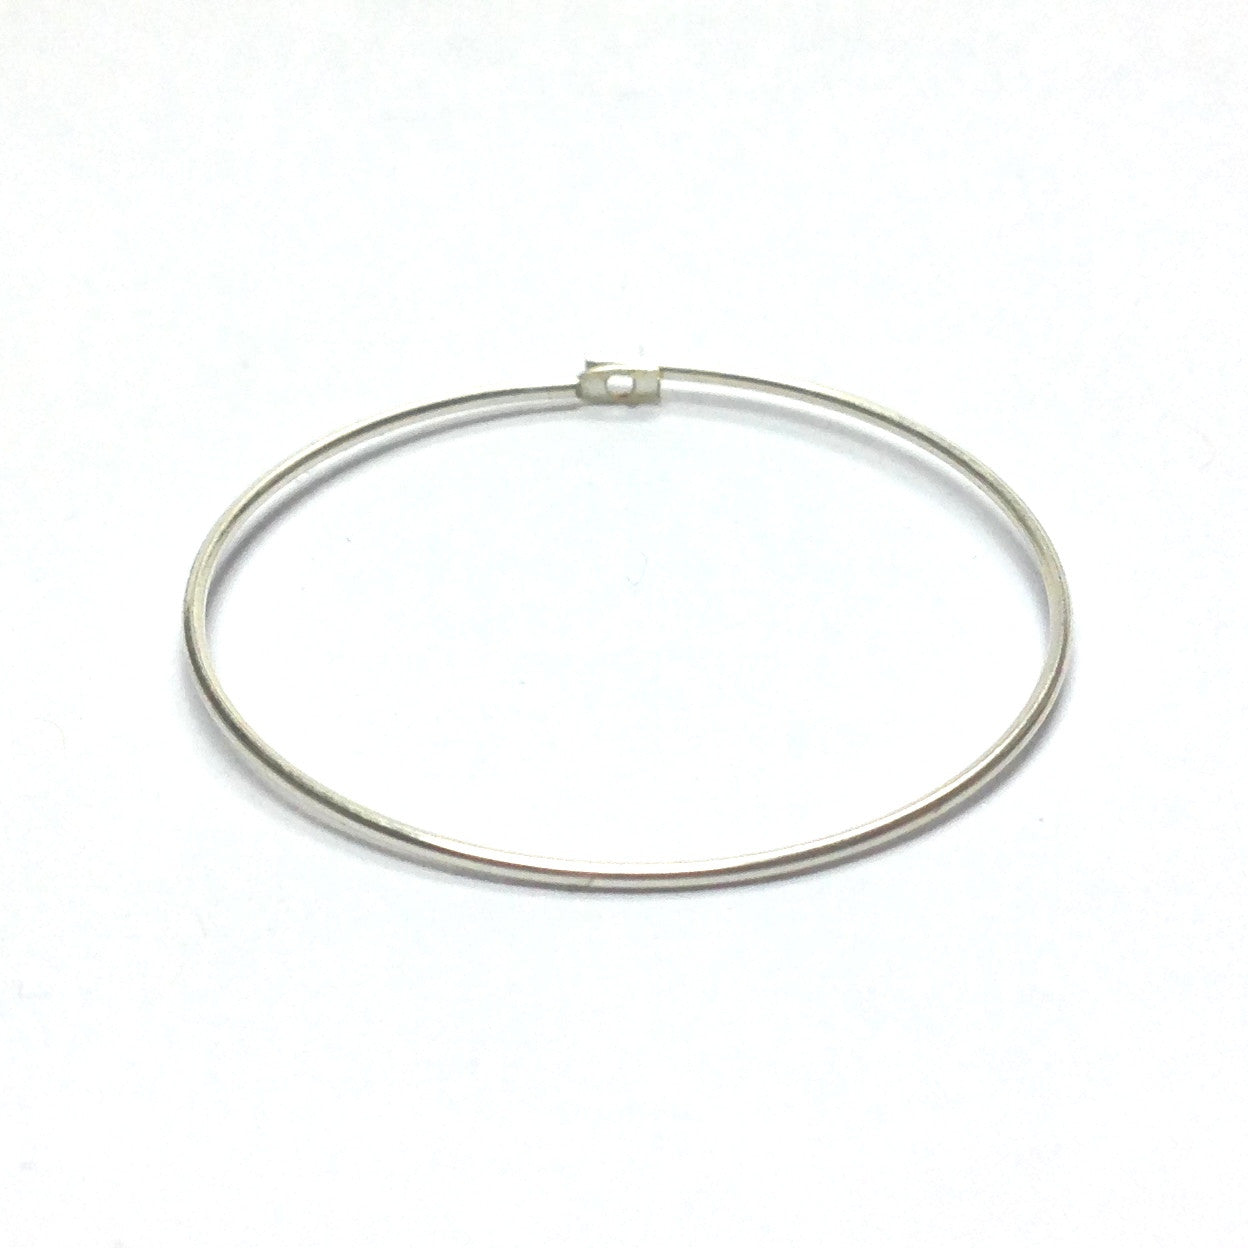 1-1/4" Round Wire Hoop With Flat End & Hole Silver (144 pieces)